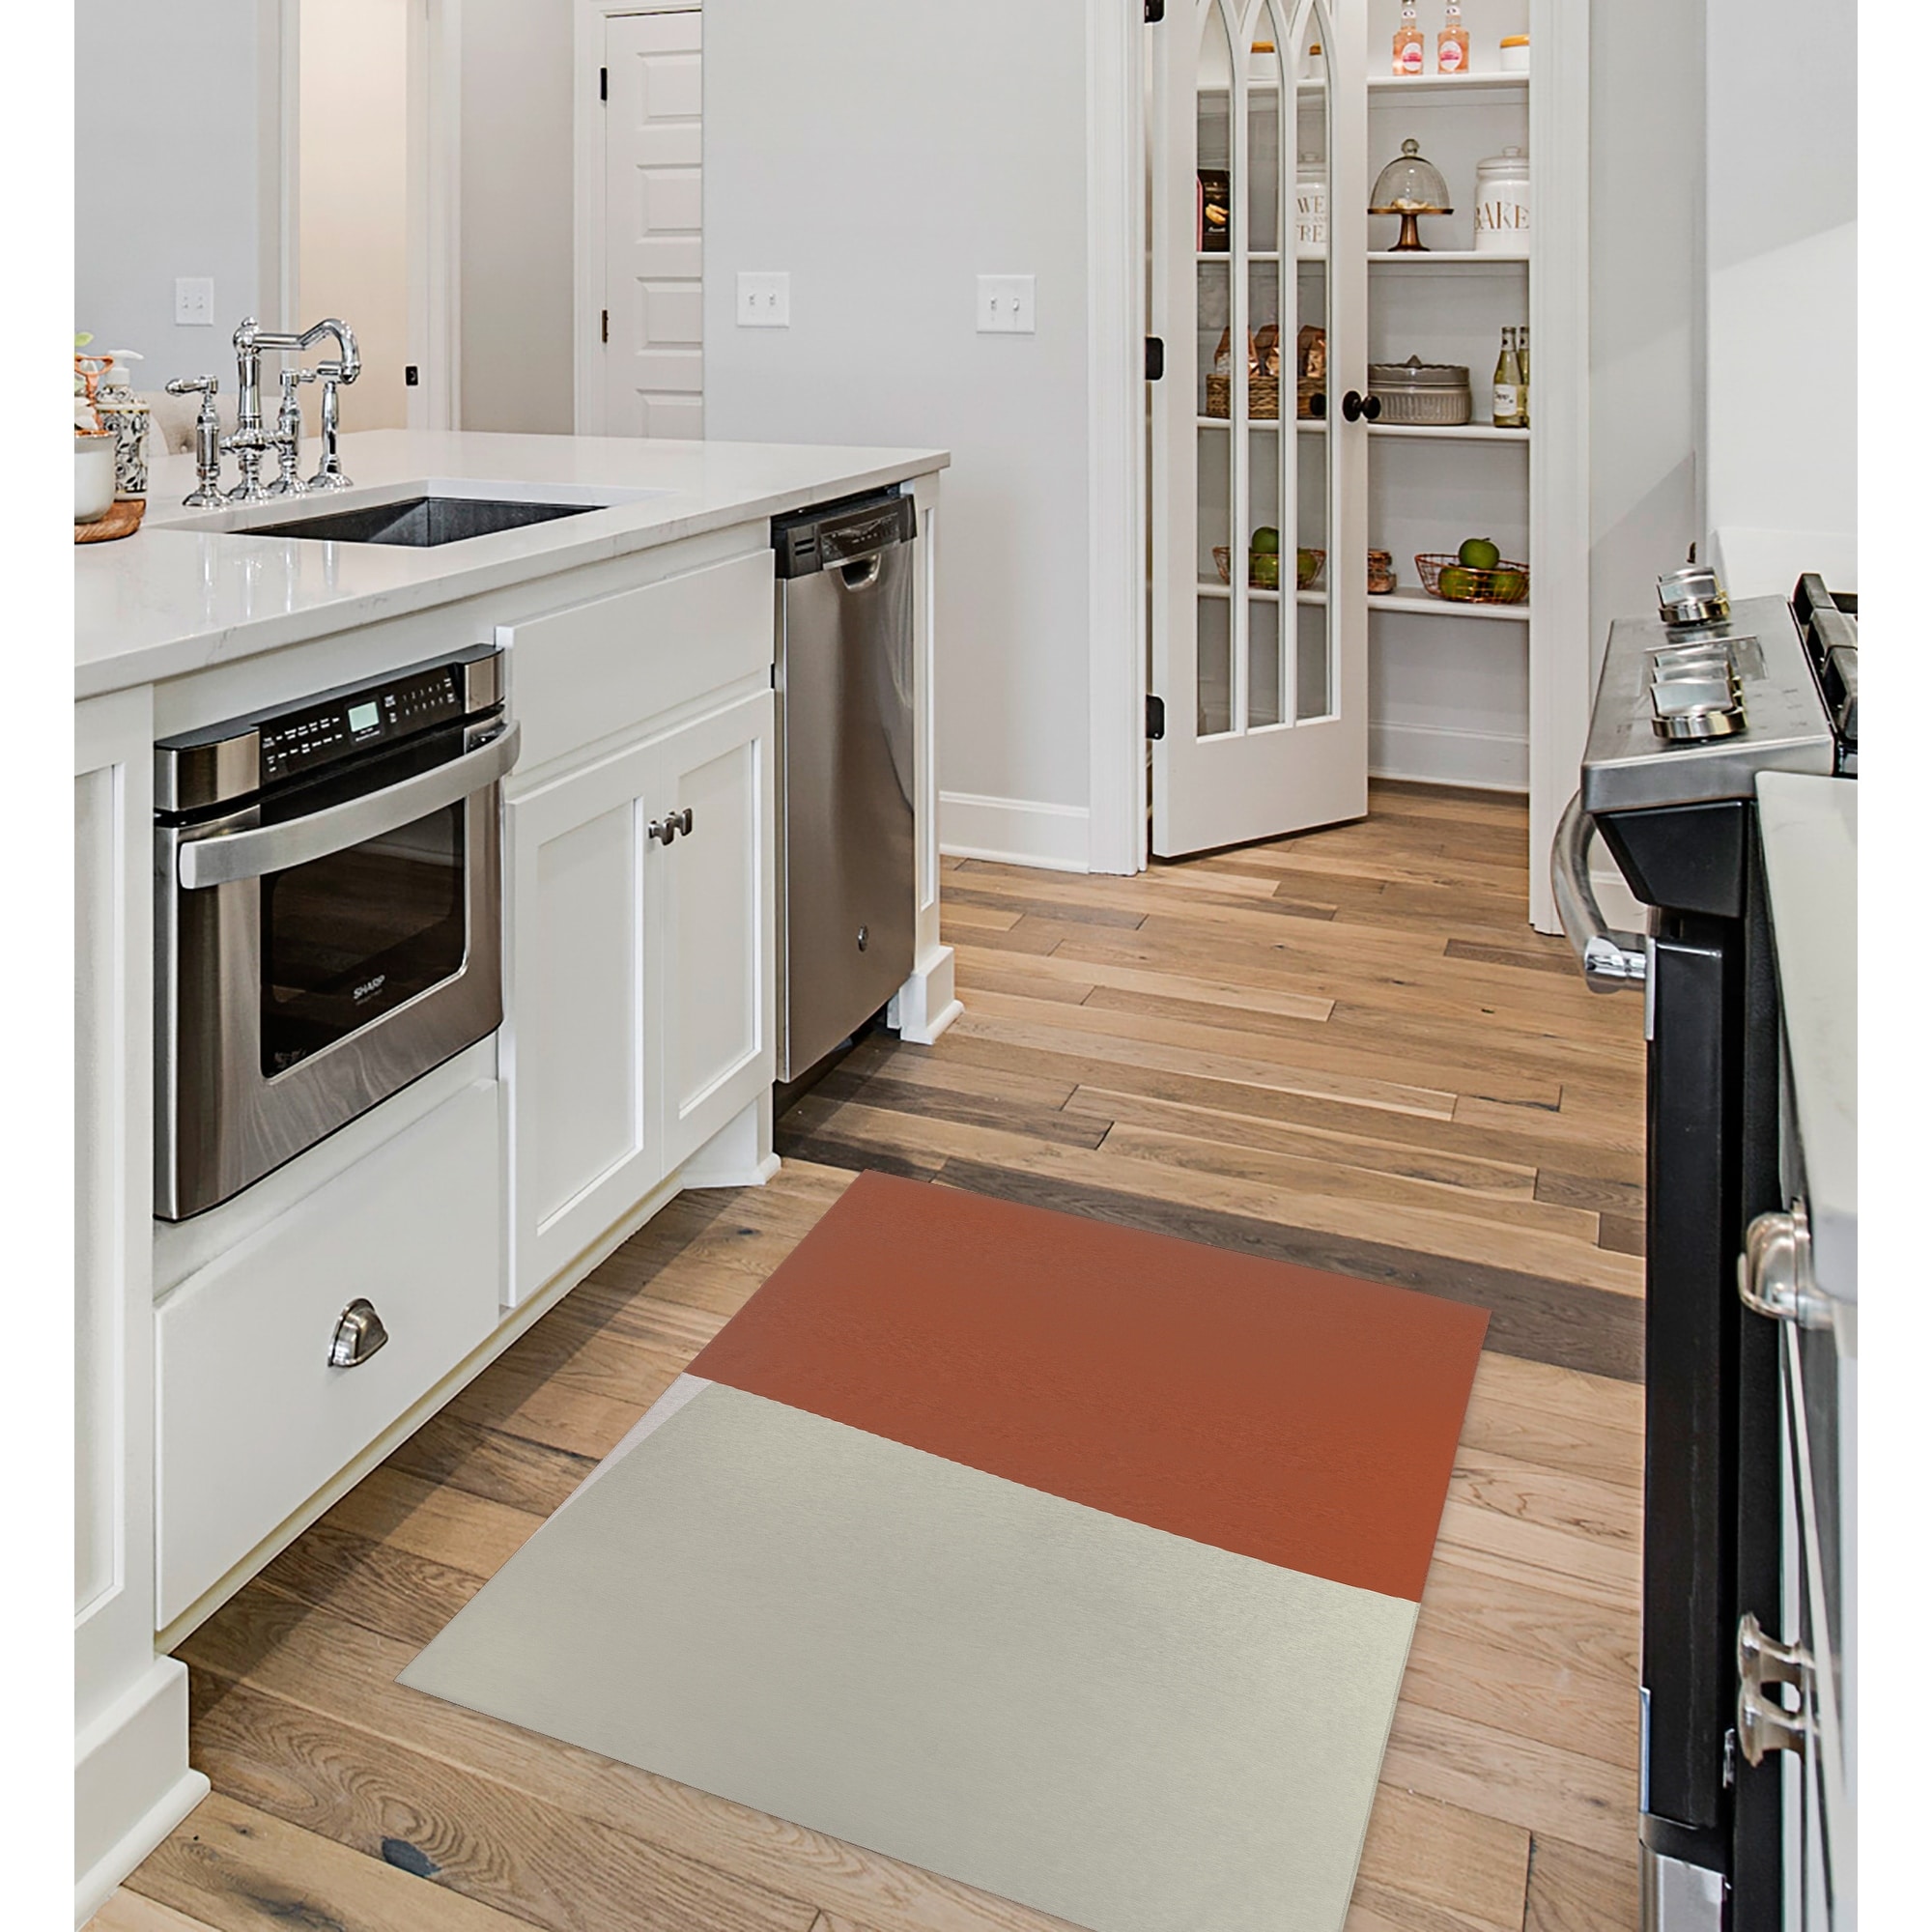 STACK RUST Kitchen Mat By Becky Bailey - Bed Bath & Beyond - 34797761